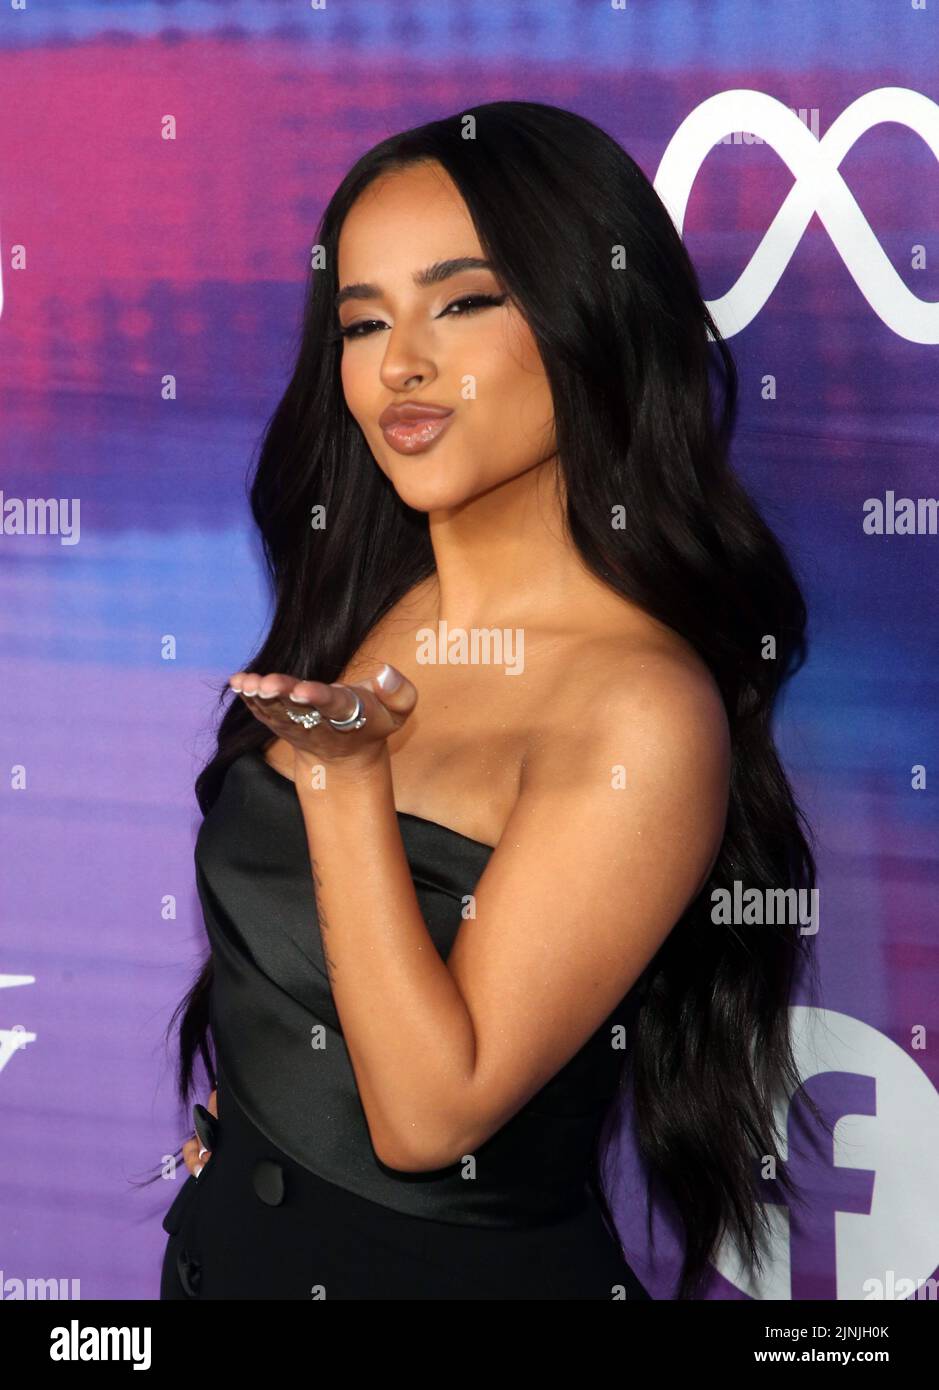 Los Angeles, California, USA. 11th Aug, 2022. Becky G. Variety's 2022 Power Of Young Hollywood Celebration Presented By Facebook Gaming held at Neuehouse Hollywood in Los Angeles. Credit: AdMedia Photo via/Newscom/Alamy Live News Stock Photo